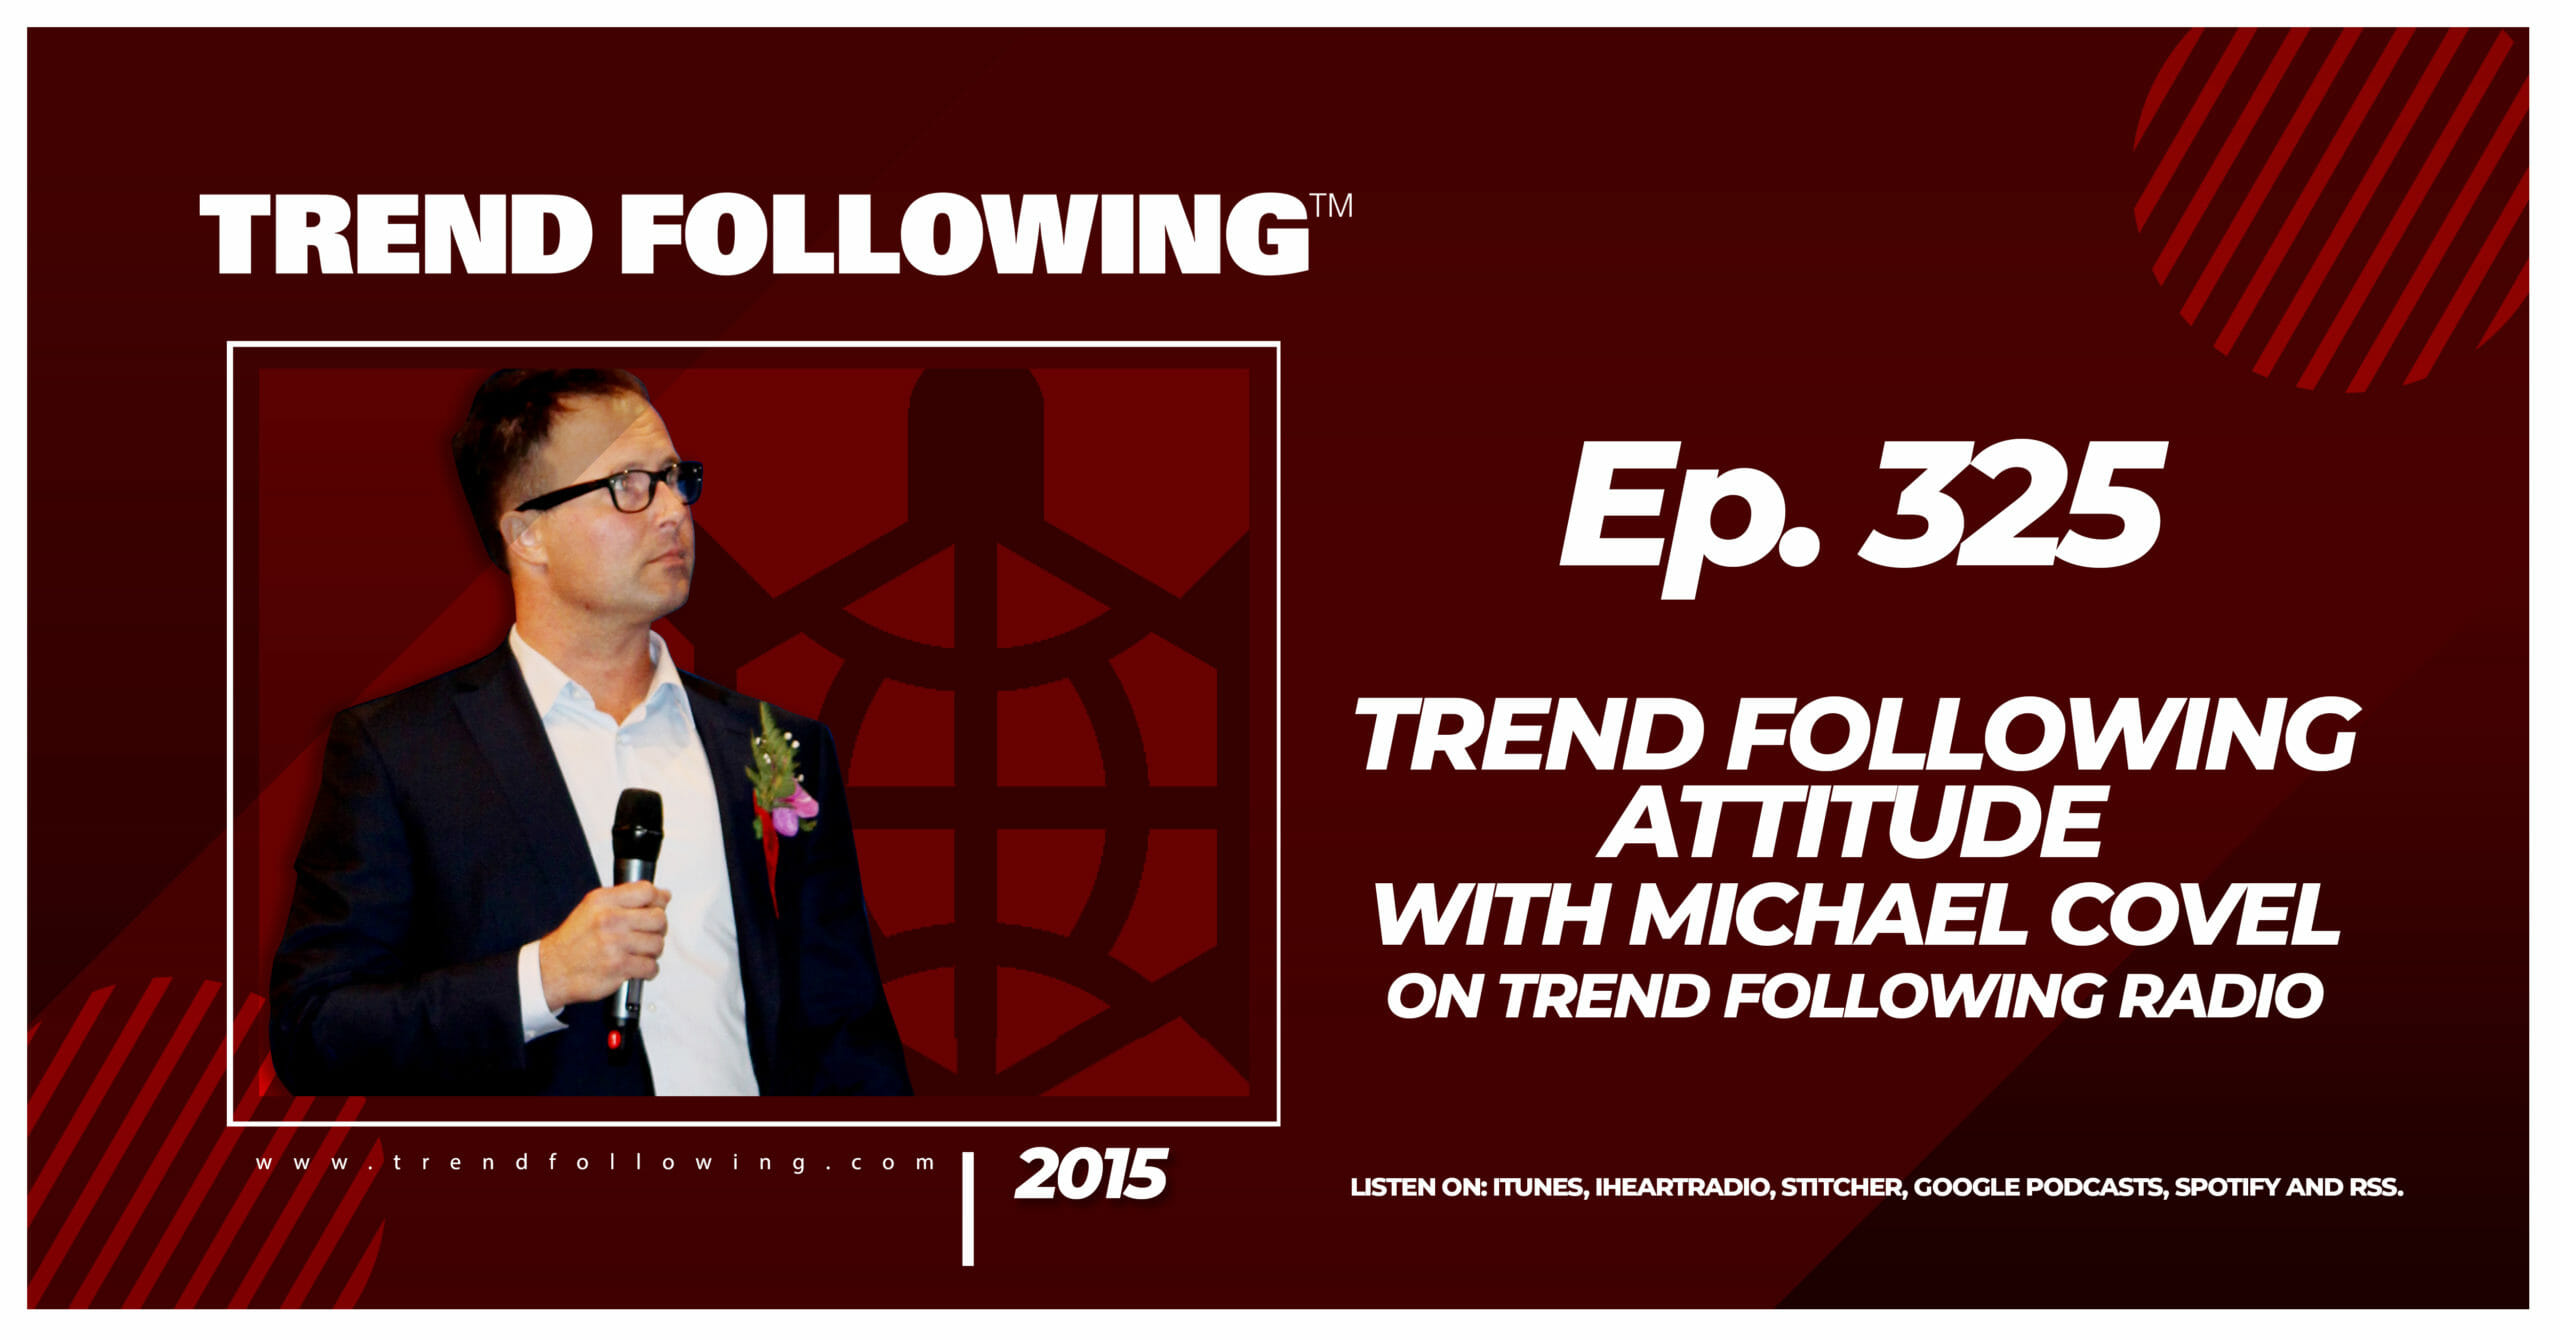 Trend Following Attitude with Michael Covel on Trend Following Radio